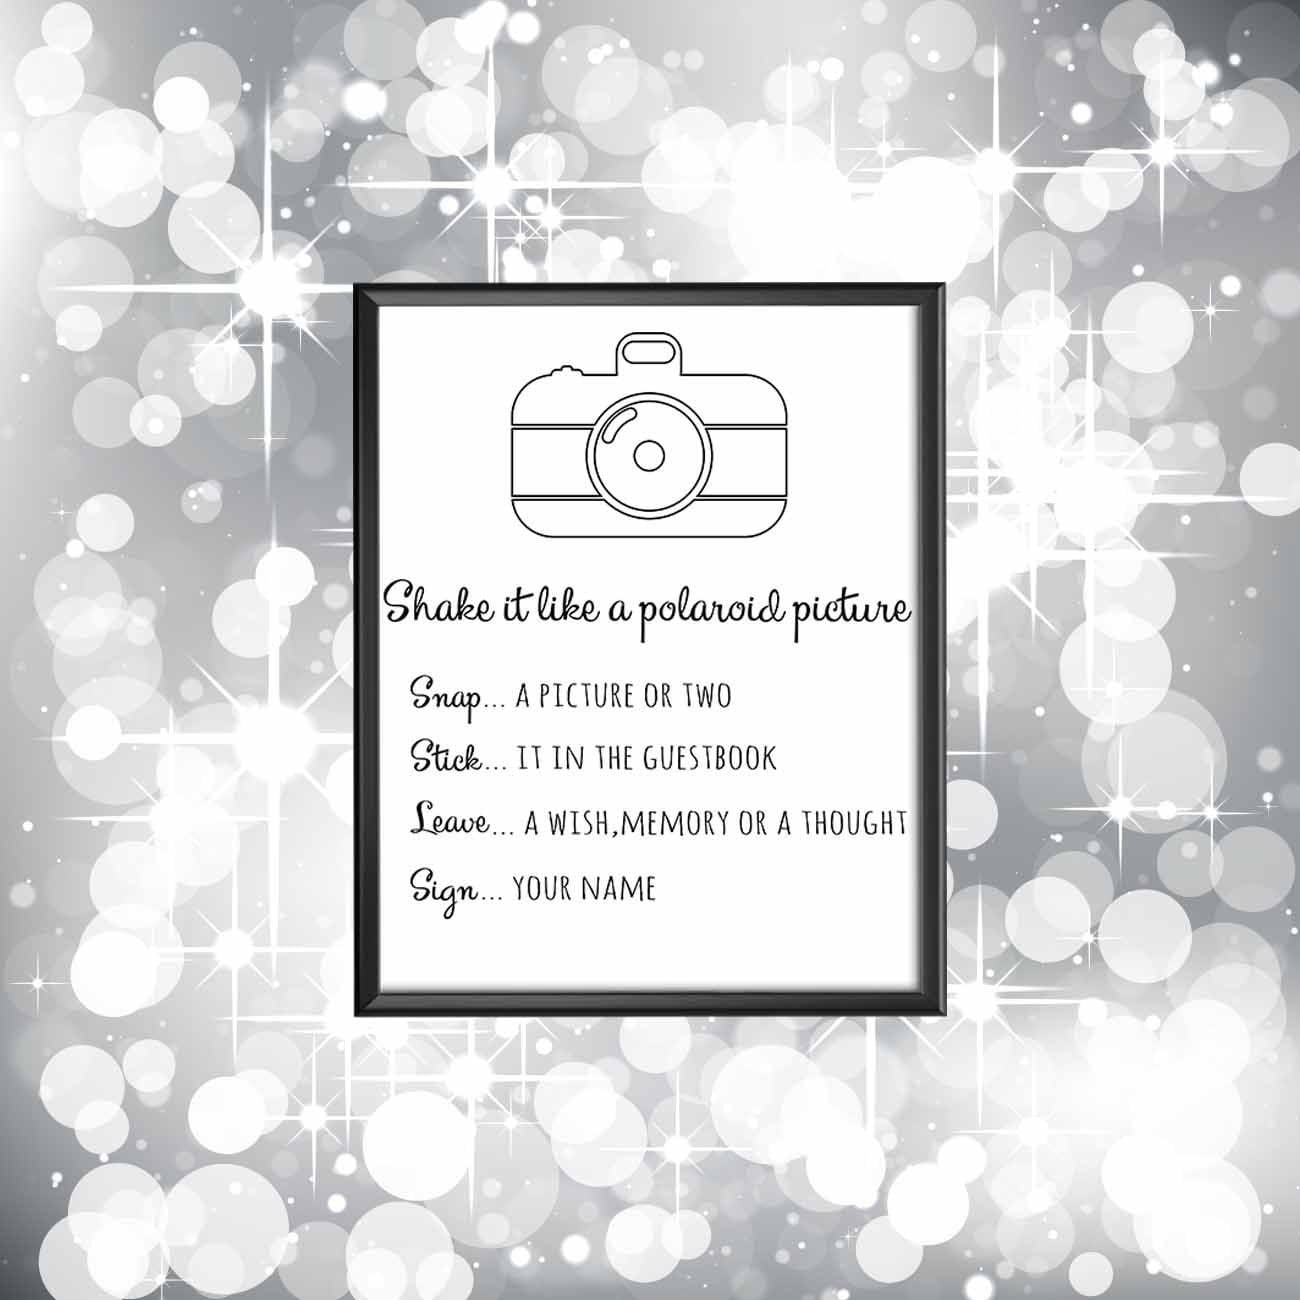 Printable Polaroid Guest Book Sign Shake It Like A Polaroid Picture Sign Photo Guestbook Polaroid Guest Book Sign Wedding Guest Book Sign Polaroid Guest Book